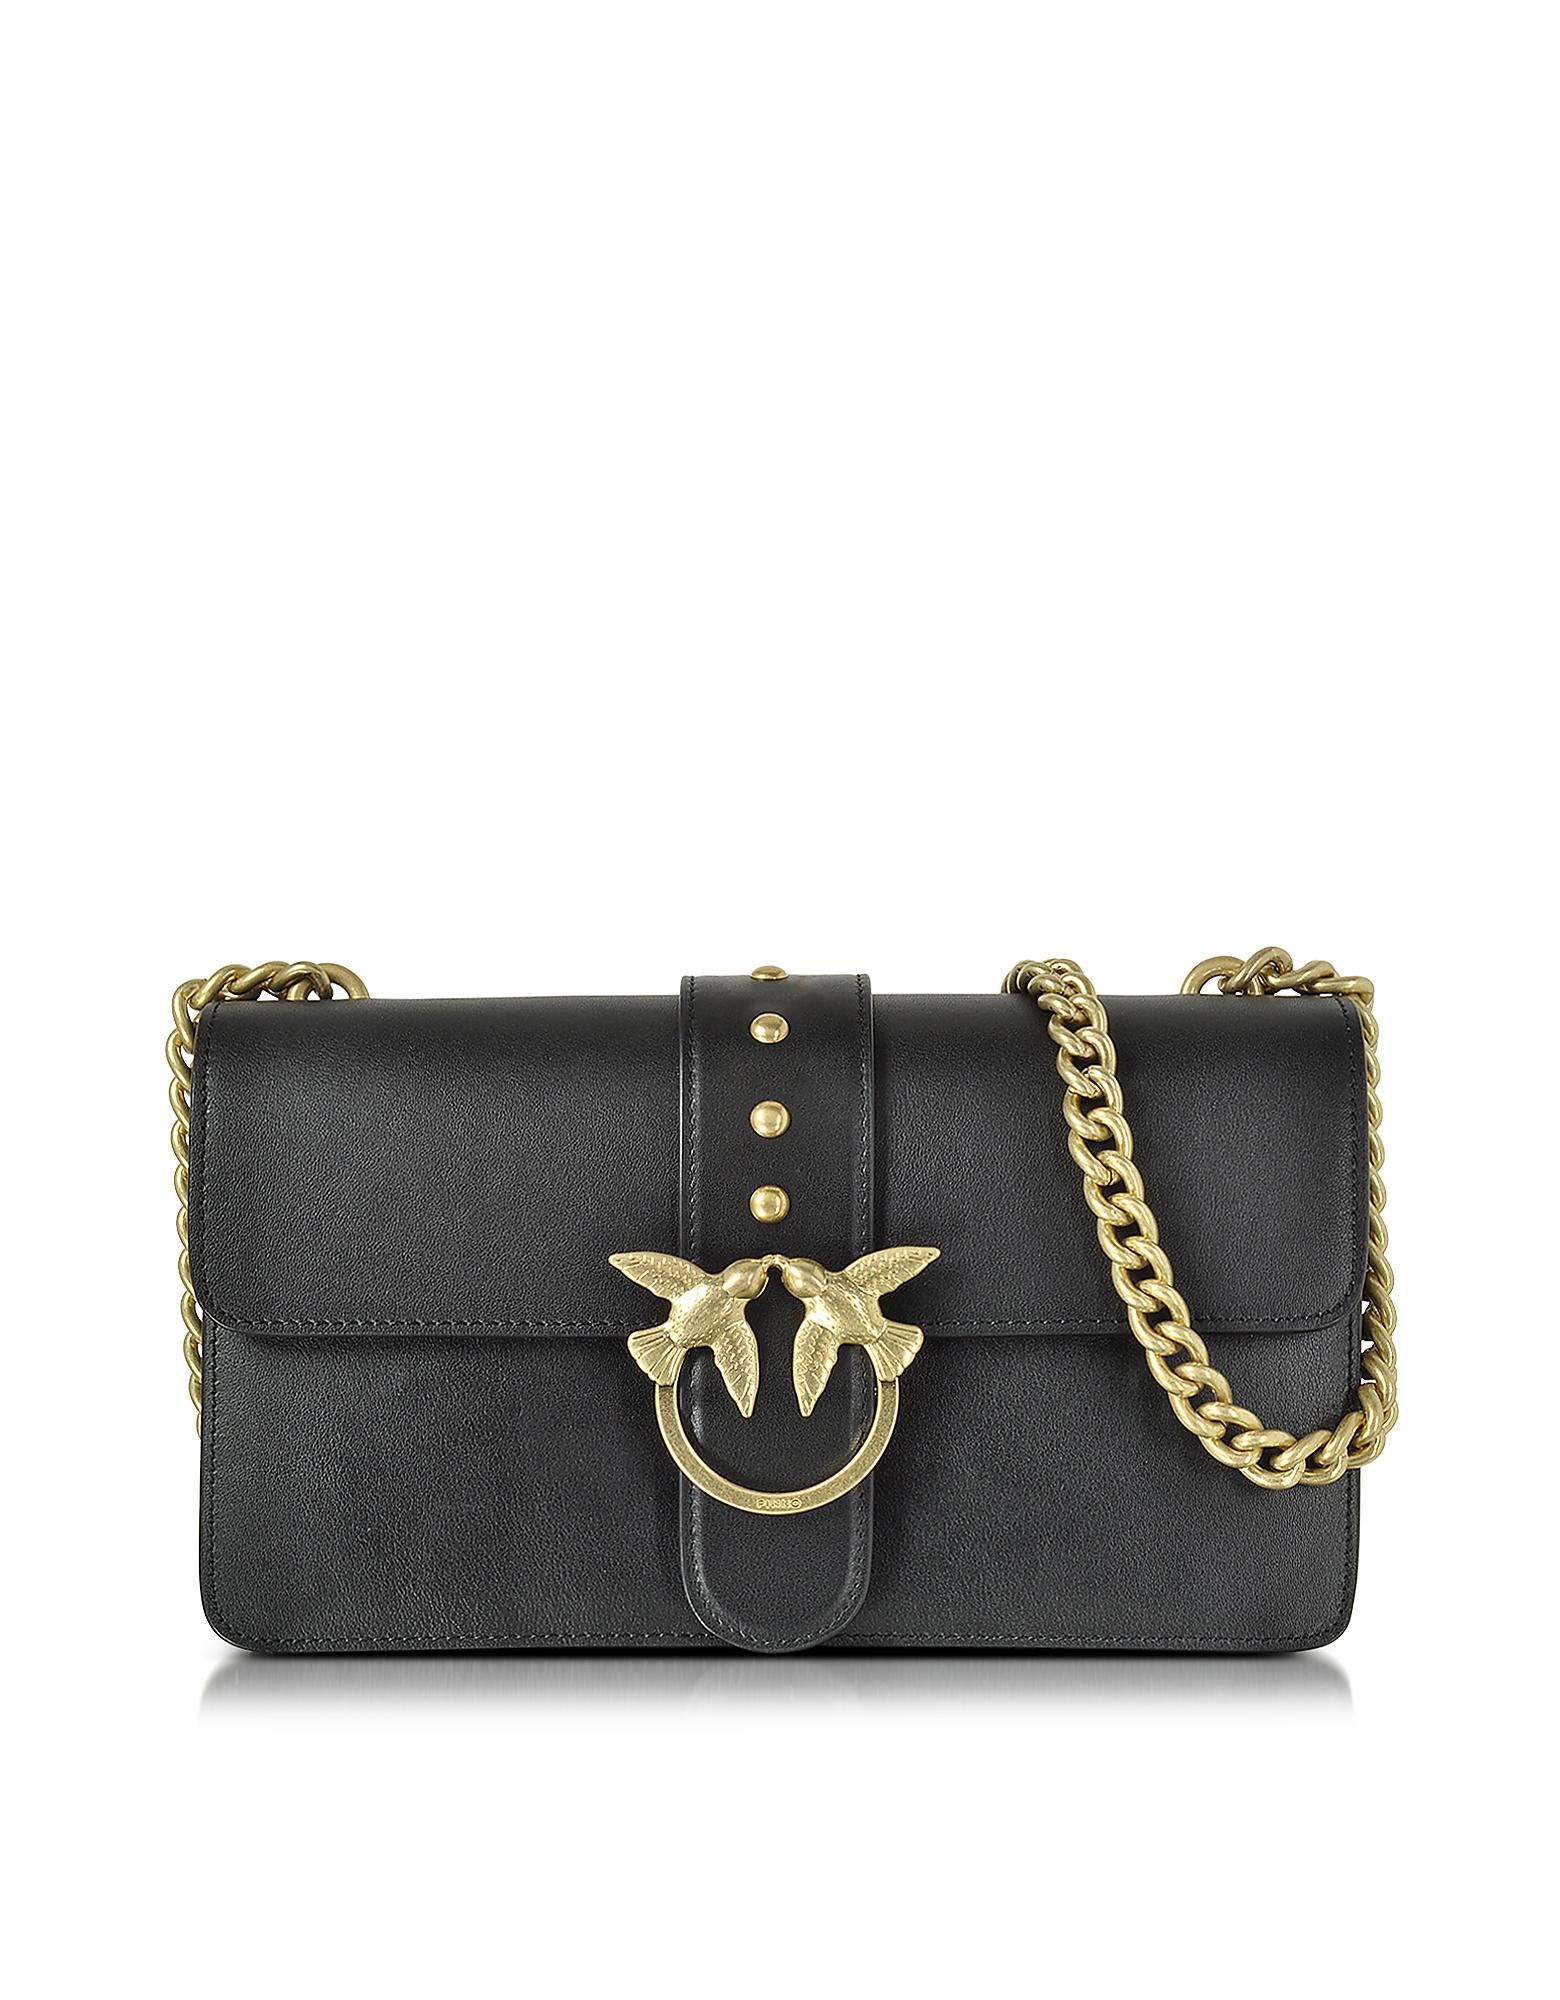 Lyst - Pinko Love Simply Leather Shoulder Bag in Black